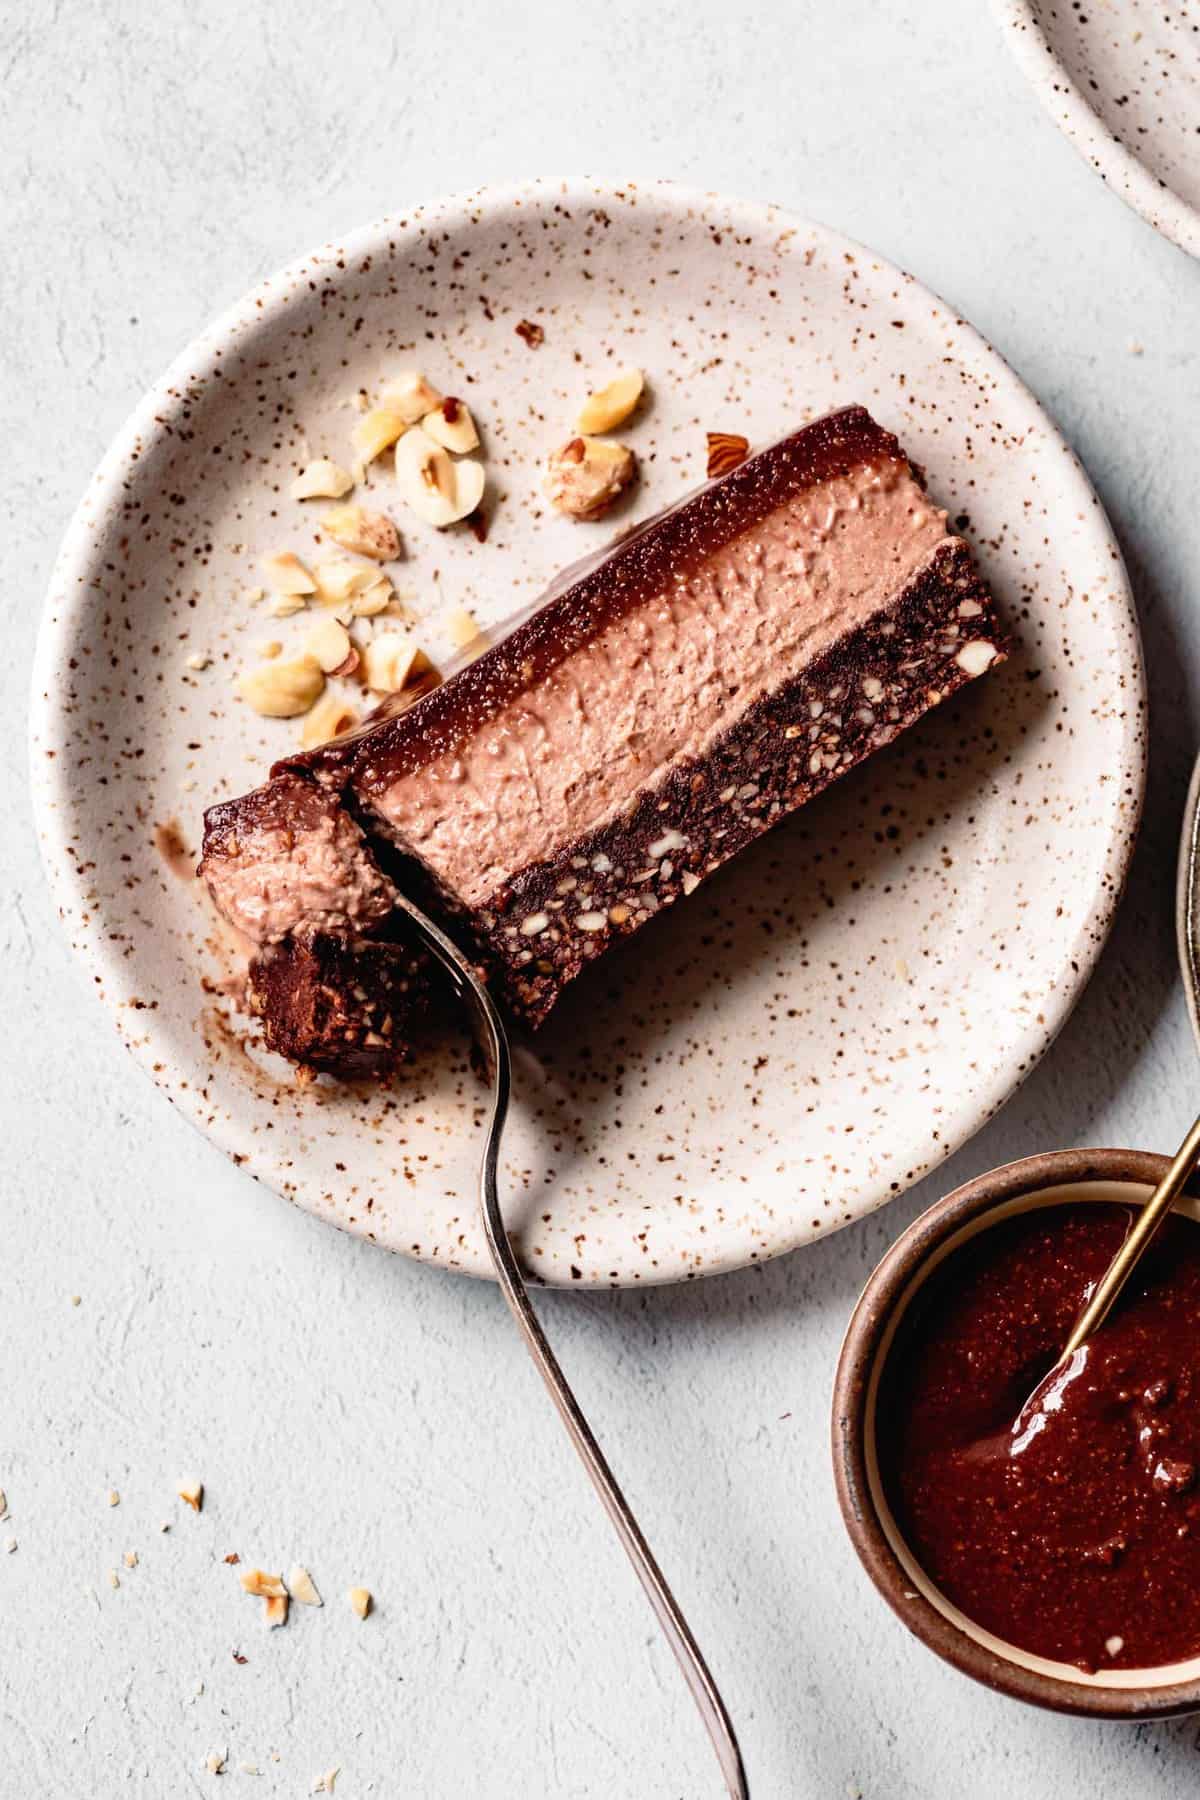 slice of no-bake chocolate hazelnut cheesecake on a plate with fork cutting off a piece